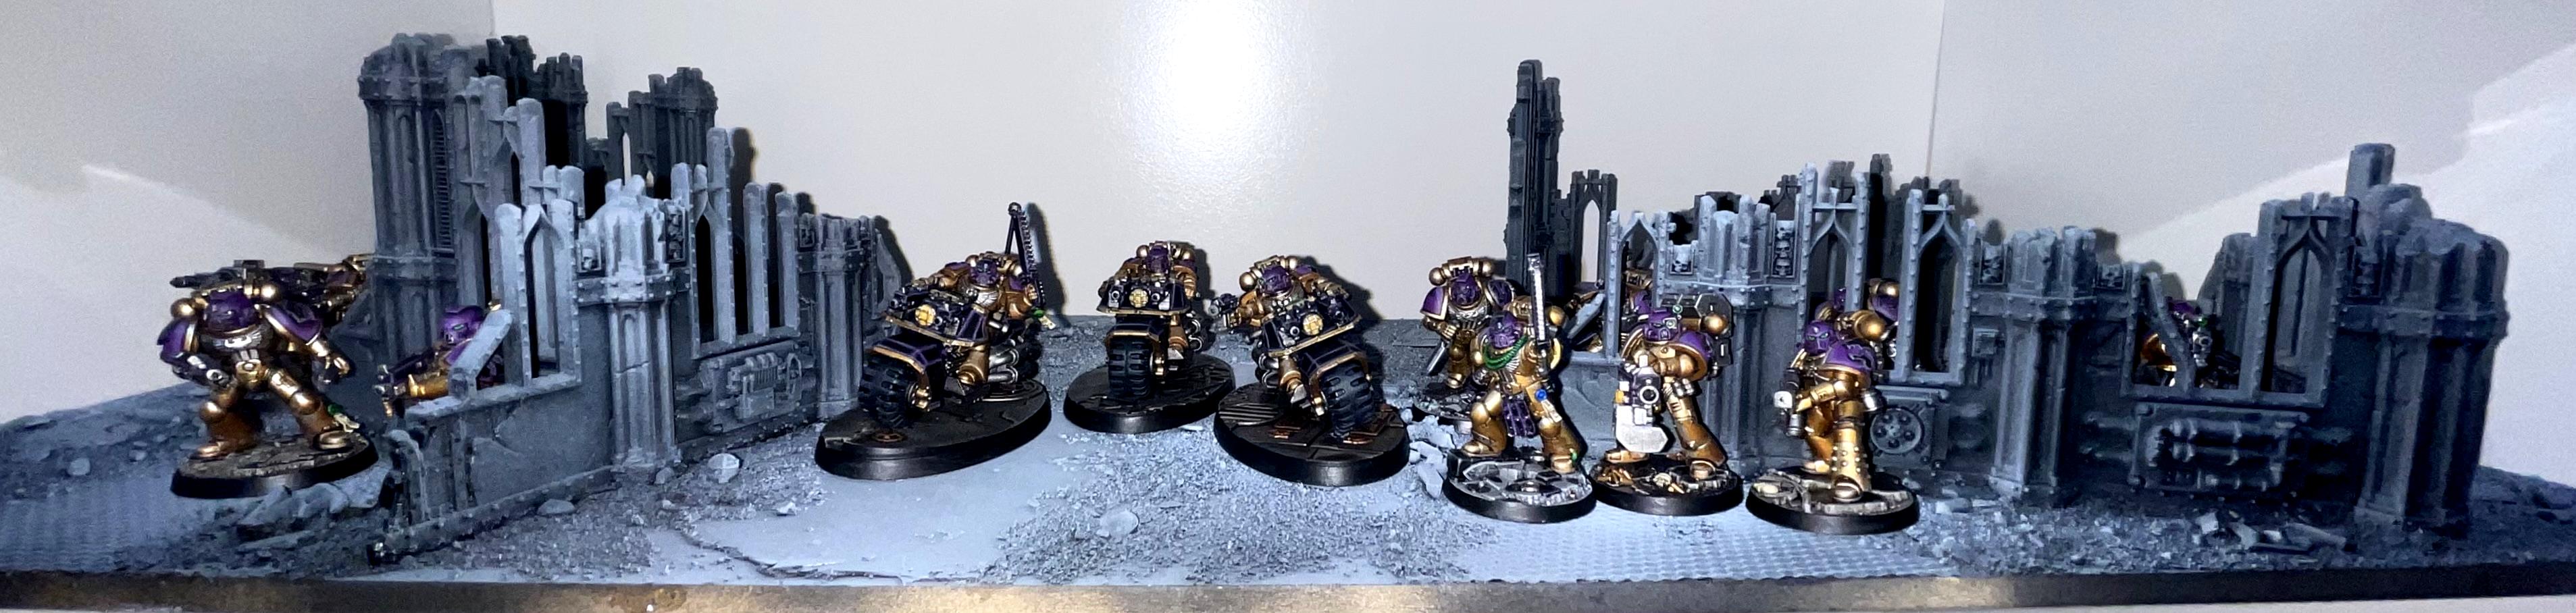 Bike Squad, Display Board, Sector Imperialis, Series 1, Space Marine Adventures, Space Marine Heroes, Space Marines, Tactical Squad, Void Panthers, Warhammer 40,000, Work In Progress